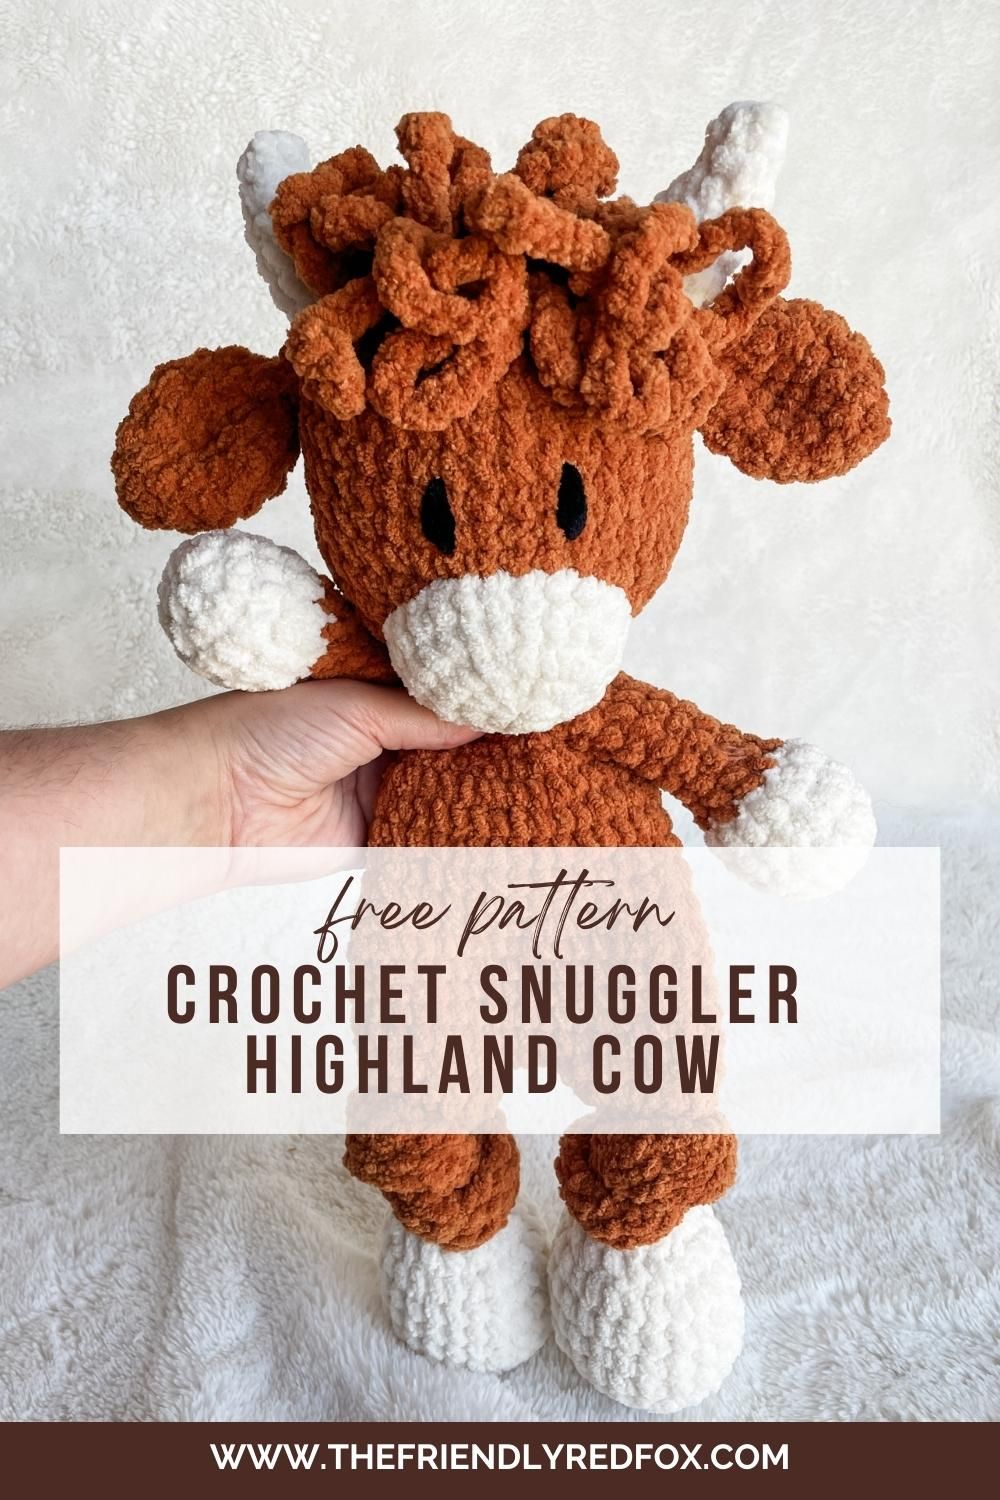 This Highland Cow Crochet Snuggler pattern would be perfect for a boho nursery! A crochet snuggler Highland Cow is a half stuffy, half blanket- the best of both worlds!